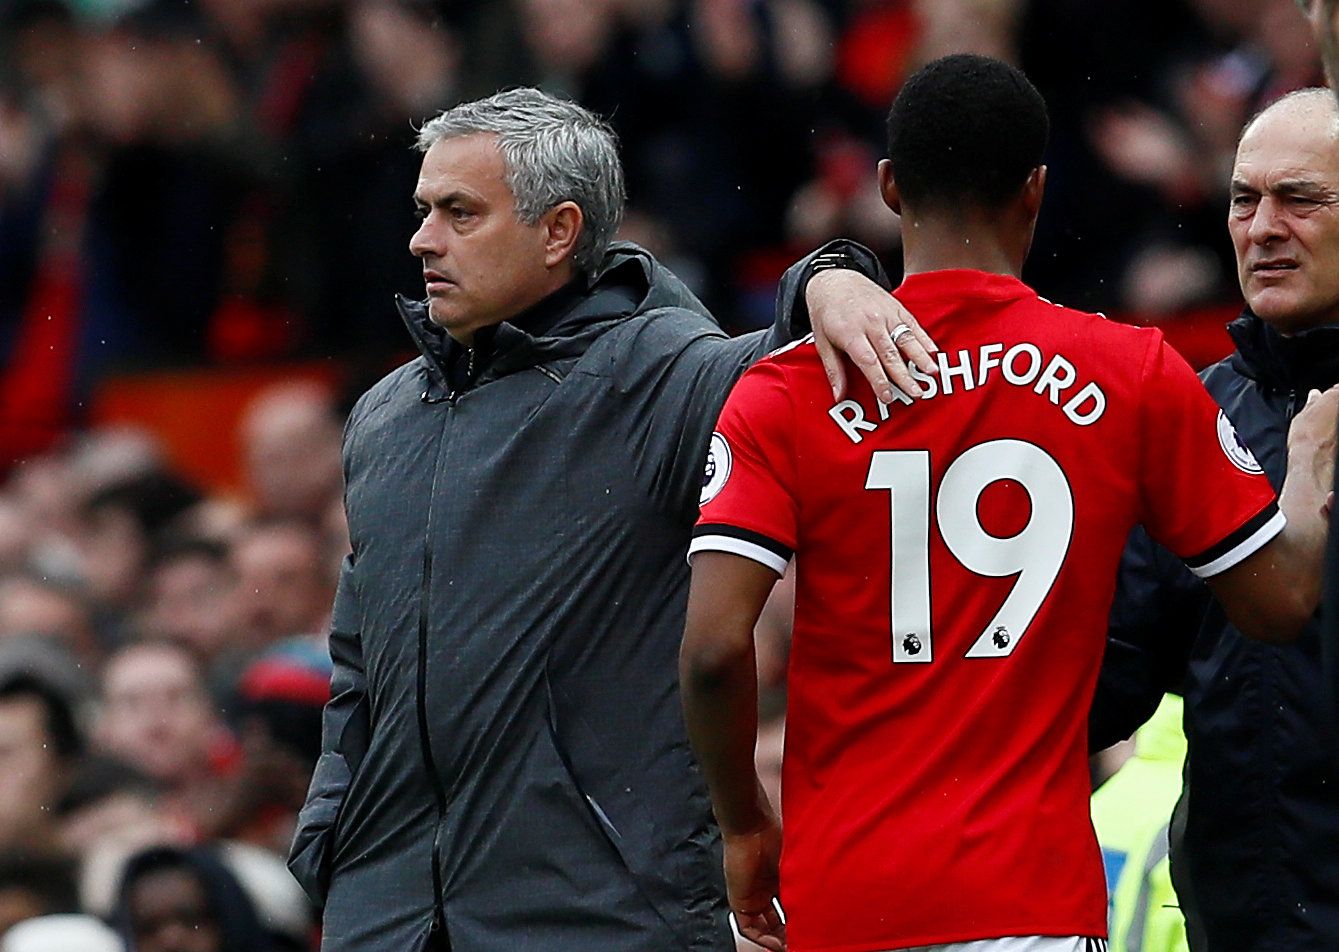 Soccer Football - Premier League - Manchester United vs Liverpool - Old Trafford, Manchester, Britain - March 10, 2018   Manchester United manager Jose Mourinho with Marcus Rashford as he is substituted   Action Images via Reuters/Jason Cairnduff    EDITORIAL USE ONLY. No use with unauthorized audio, video, data, fixture lists, club/league logos or 